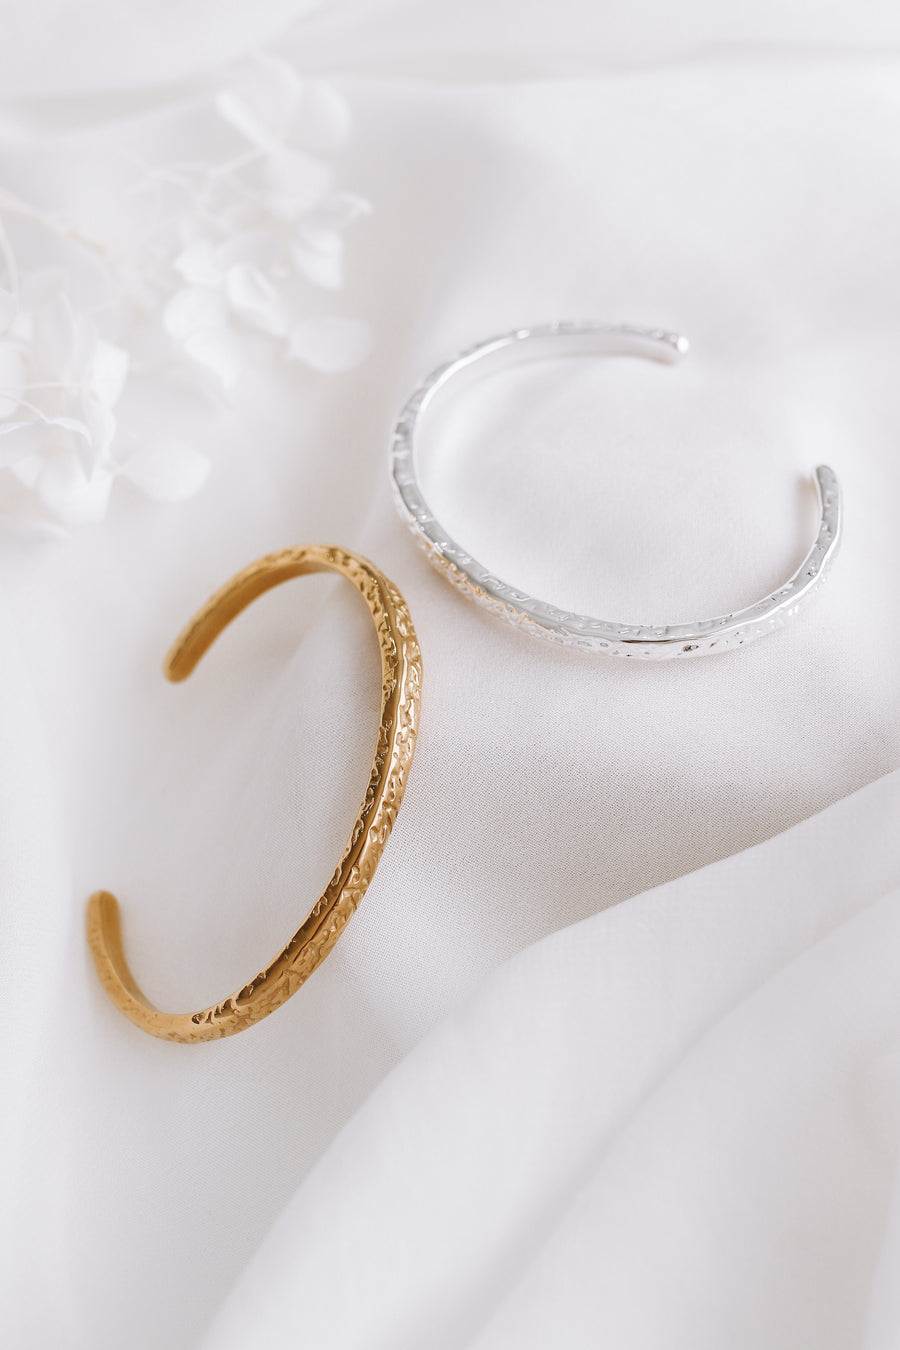 Amiee - Gold or Silver Stainless Steel Bangle